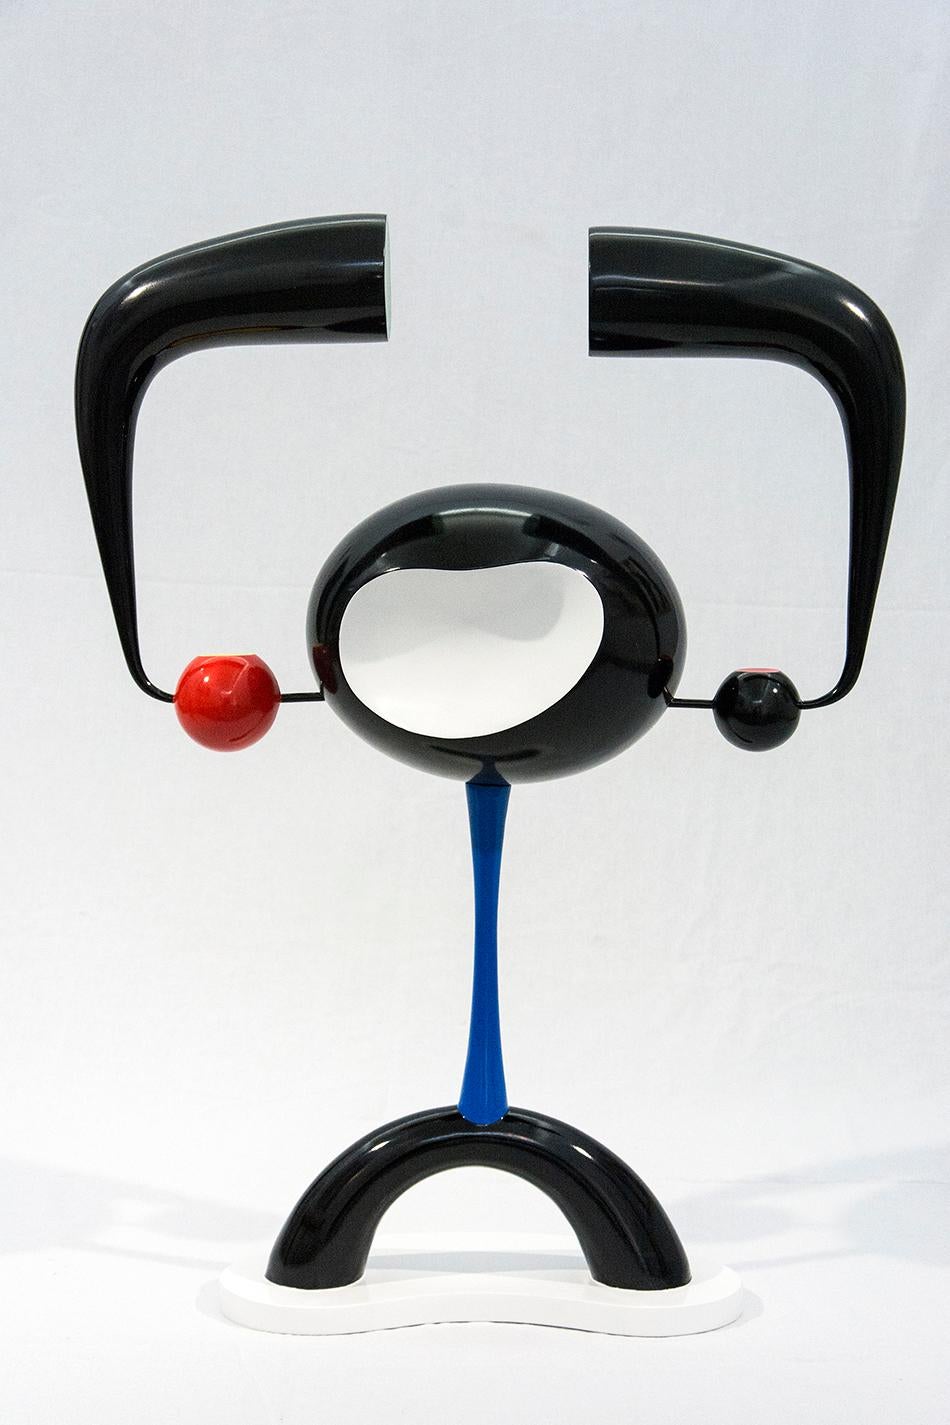 Benny Katz Abstract Sculpture - Arnold - playful body builder - black and white with red, yellow and green